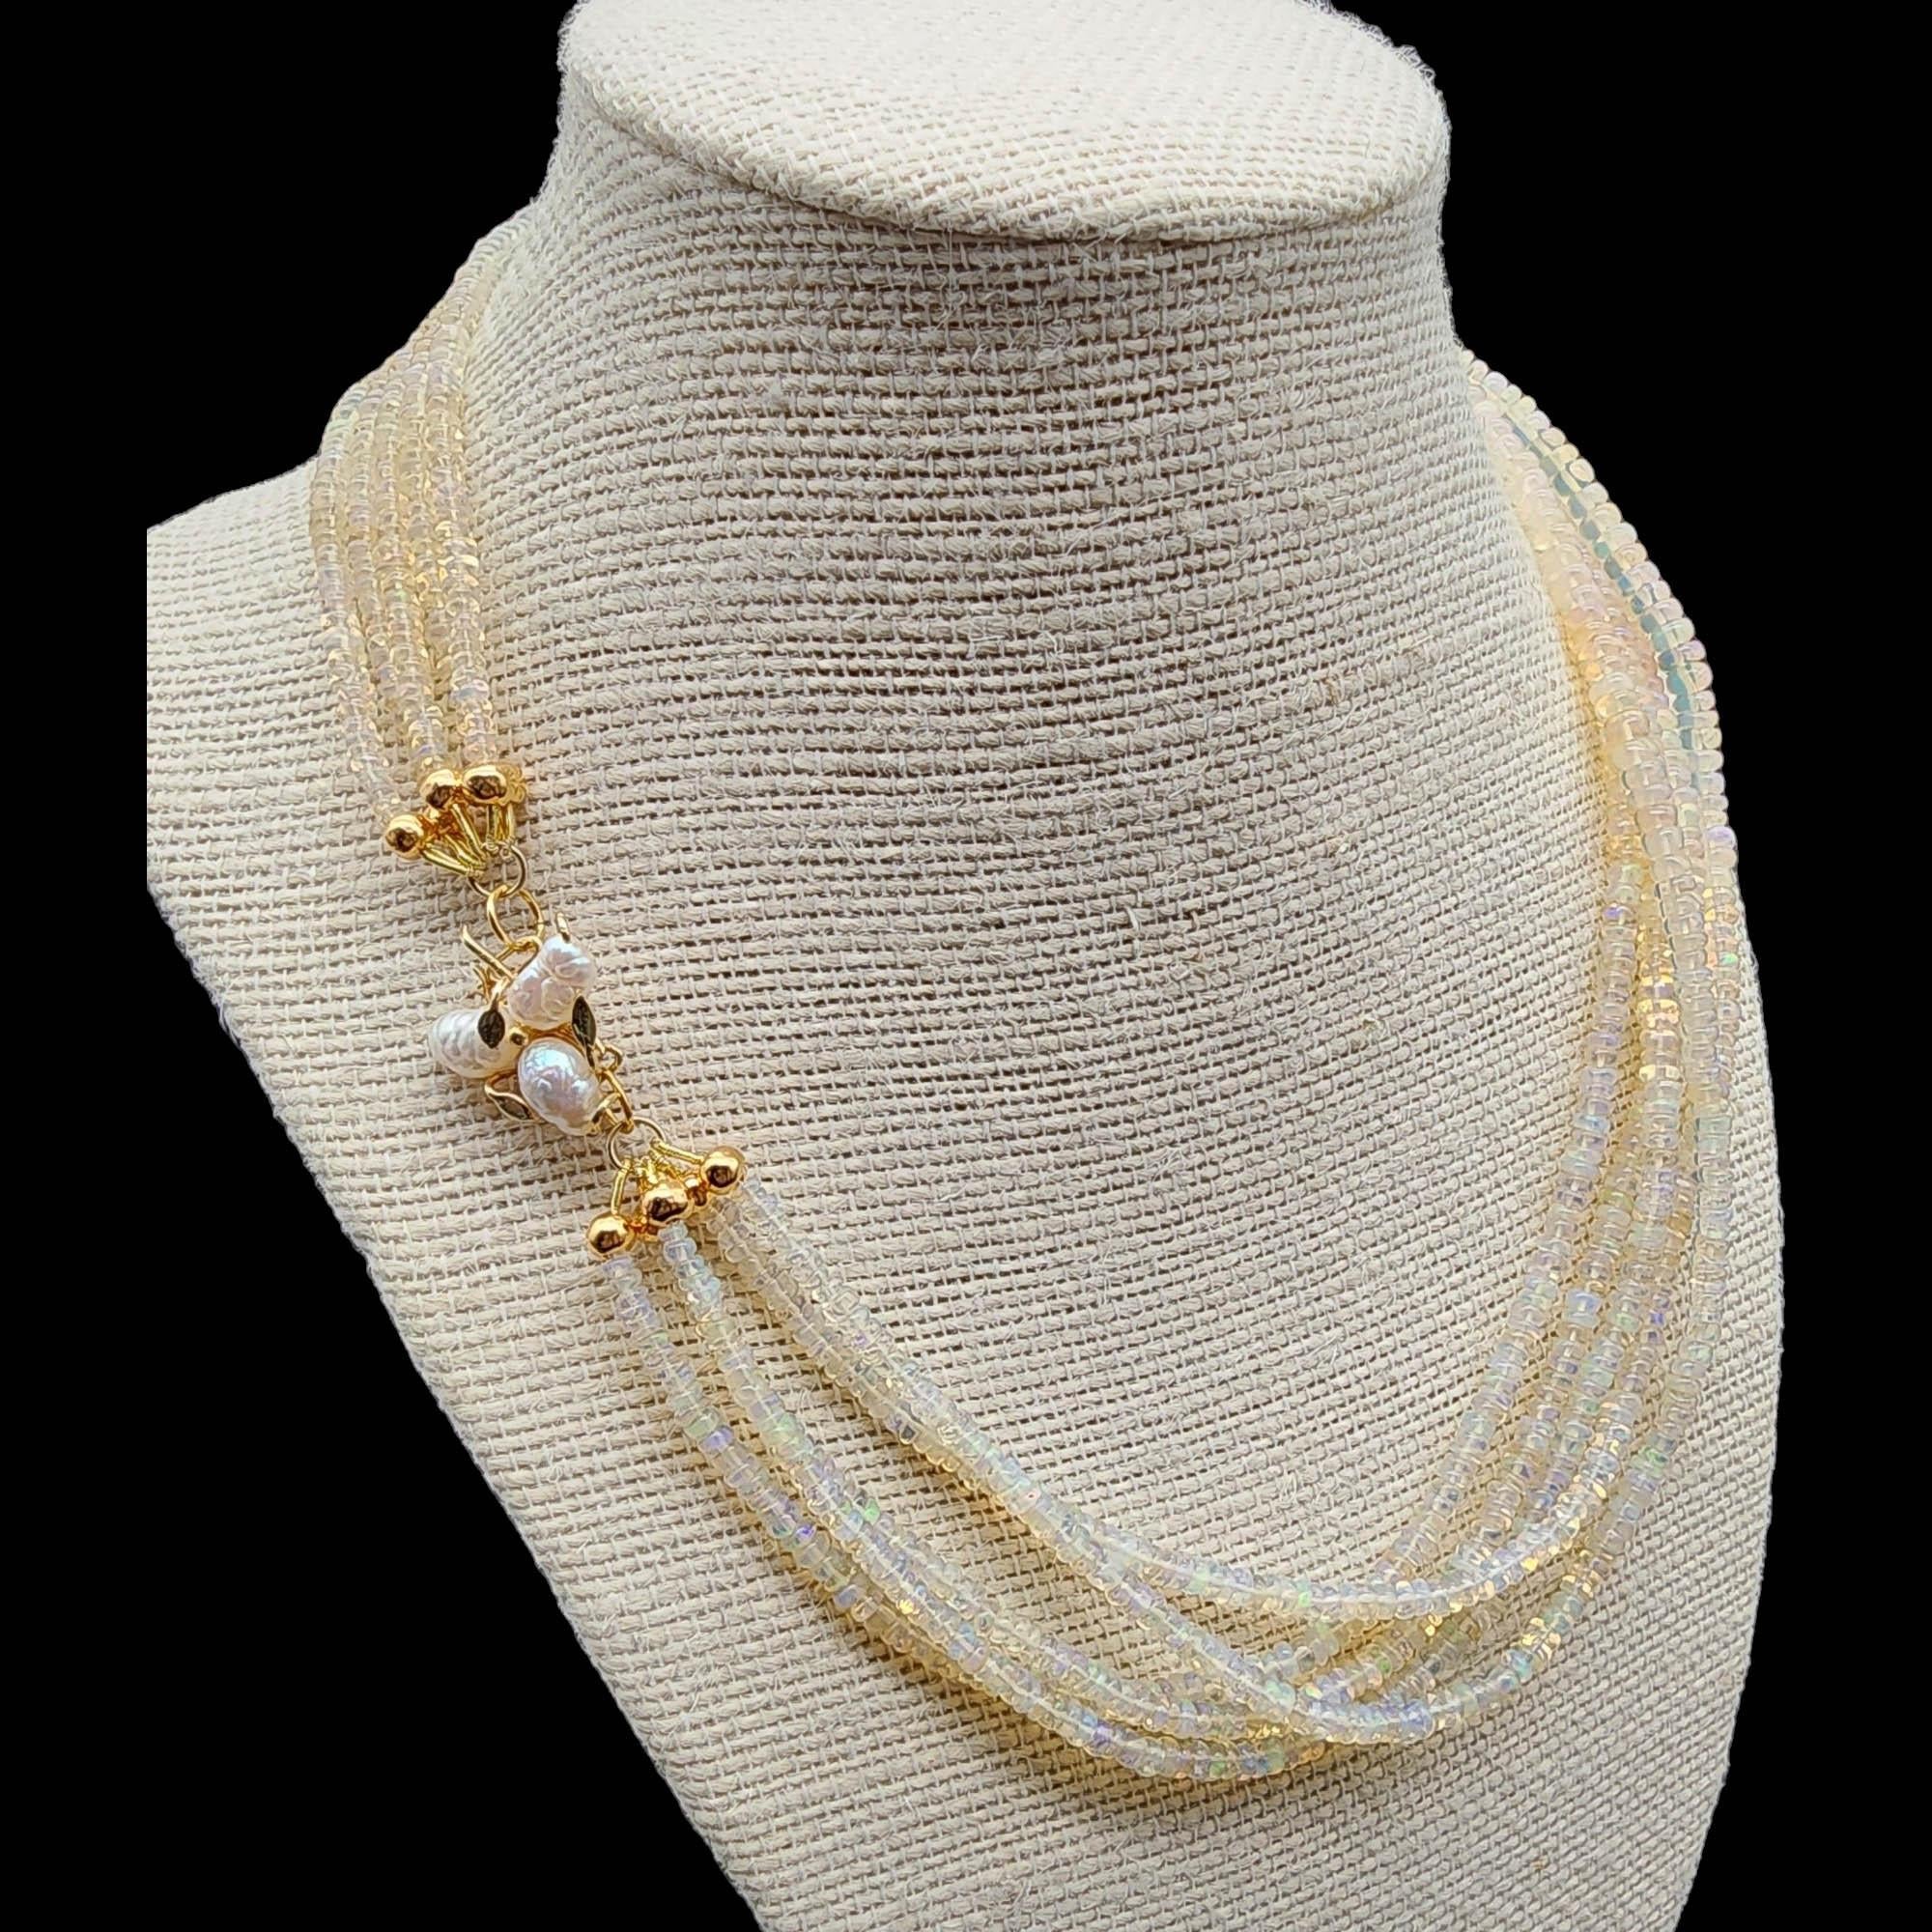 Vintage Multi-Strand Opal Bead Necklace, 14k Gold Clasp With Pearls In Excellent Condition For Sale In Milford, DE